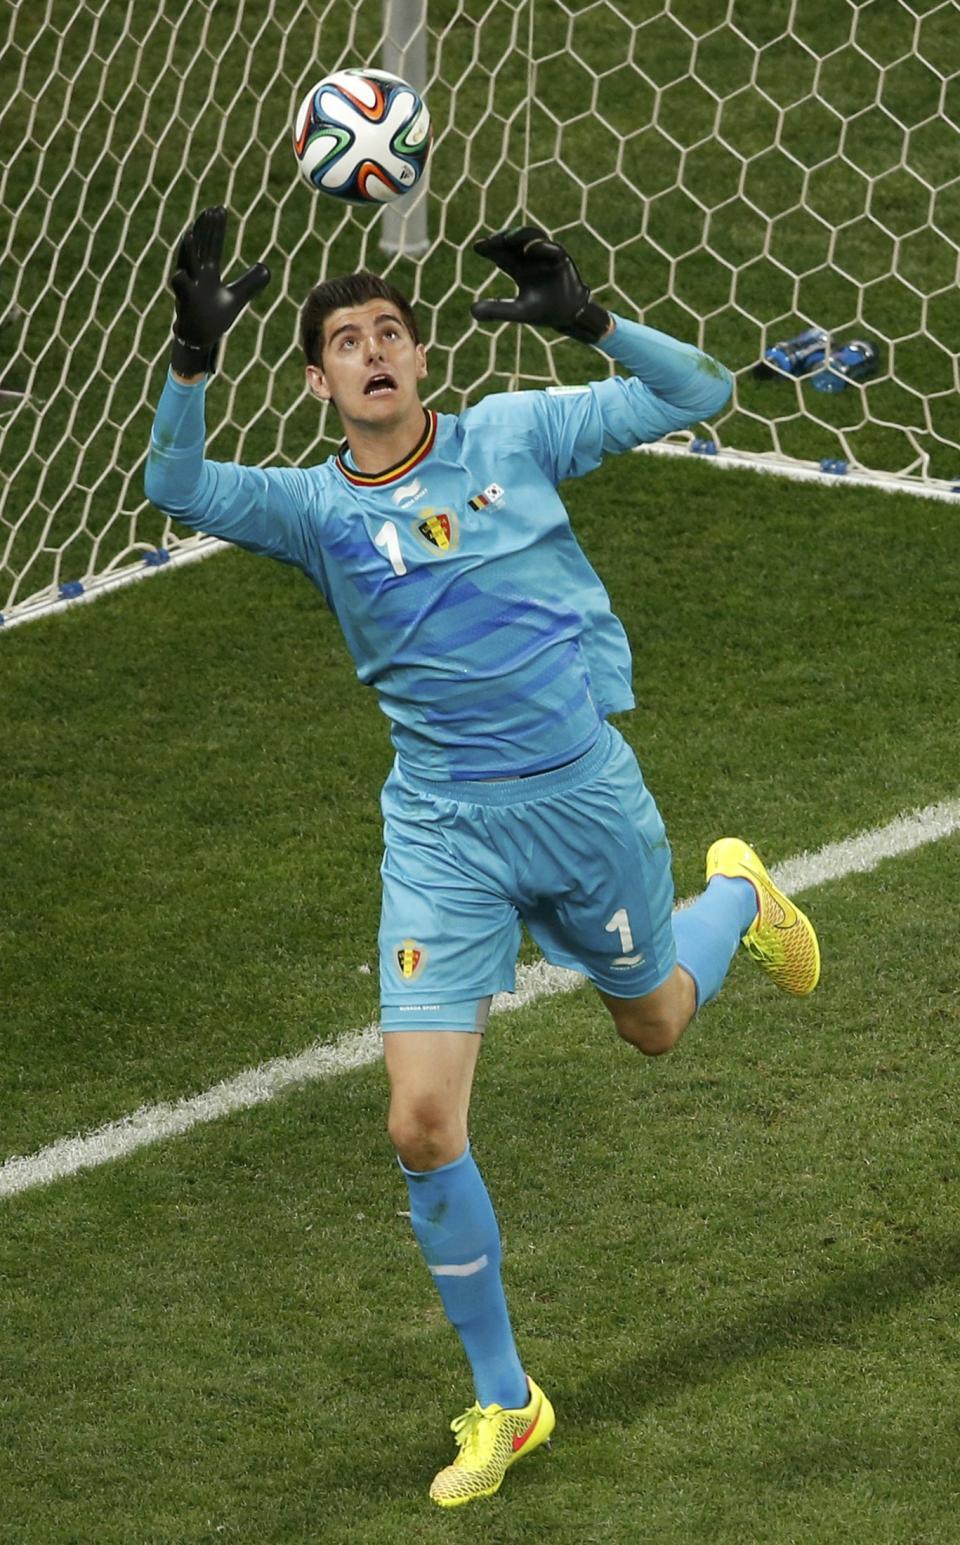 Belgium's goalkeeper Thibaut Courtois makes a save during their 2014 World Cup Group H soccer match against South Korea at the Corinthians arena in Sao Paulo